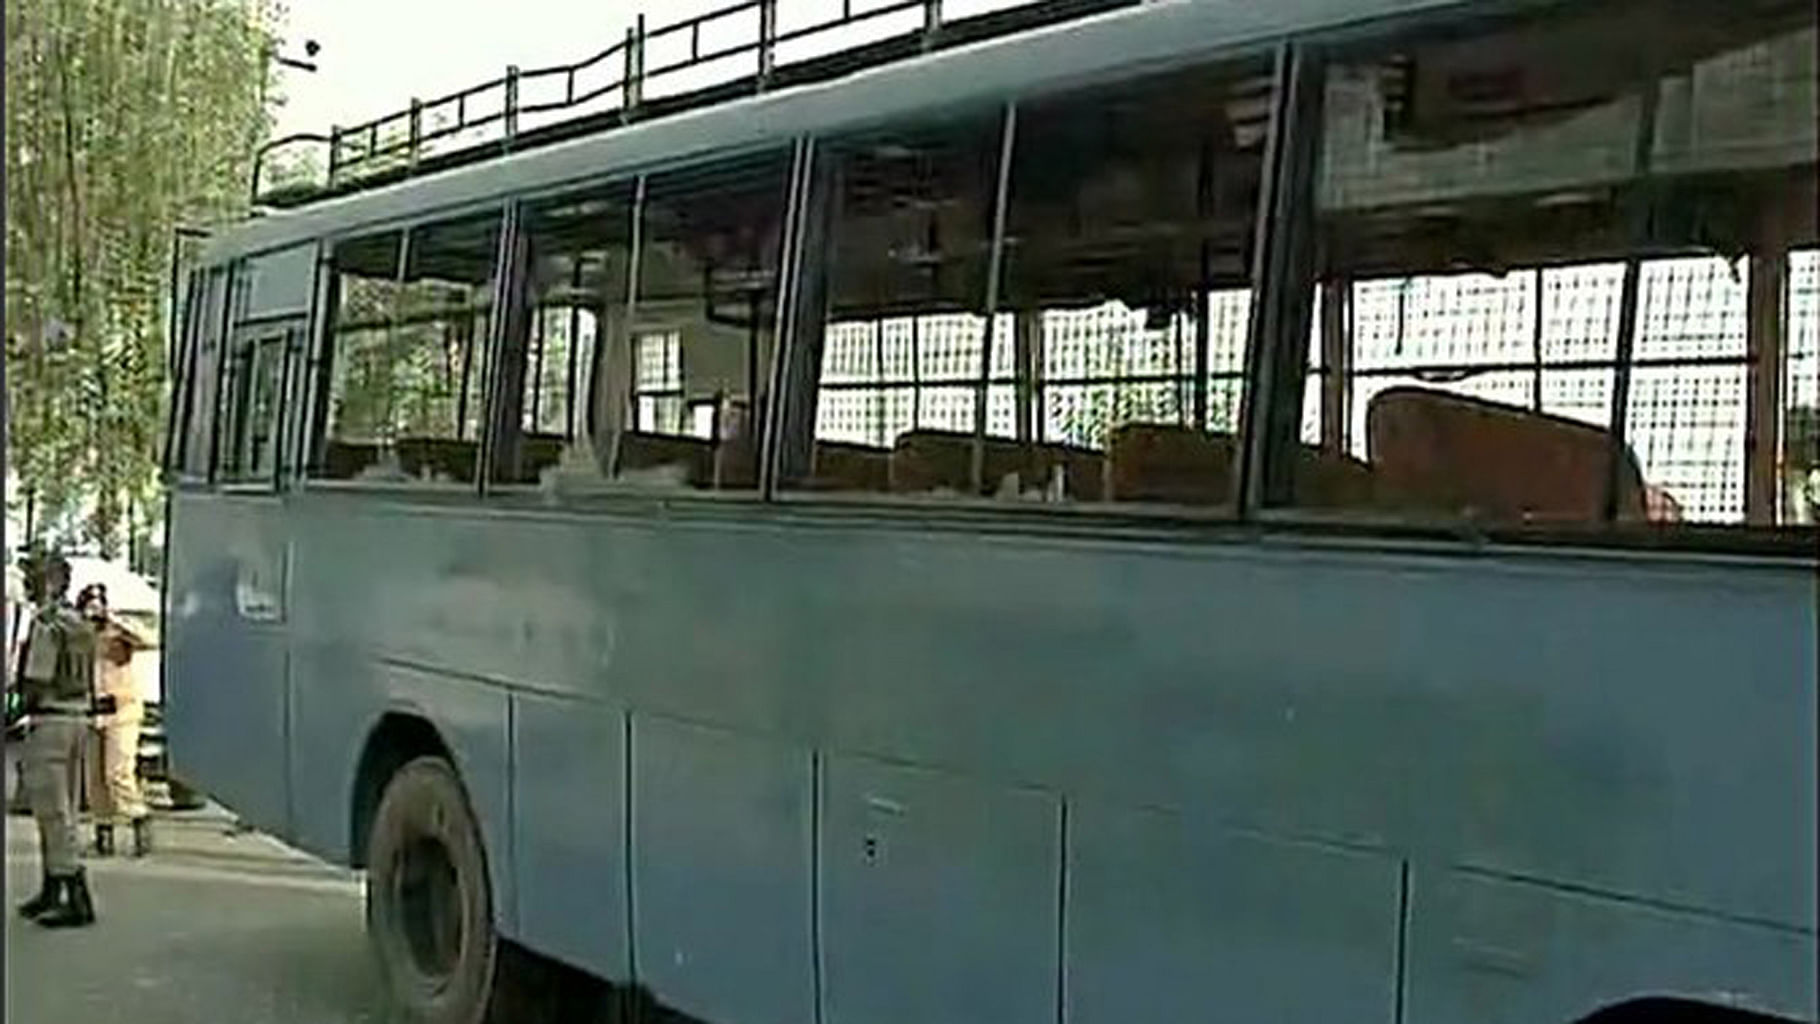 The CRPF bus that was attacked by the militants. (Photo Courtesy: <a href="https://twitter.com/ANI_news/status/746685800448851968">Twitter/@ANI_news</a>)